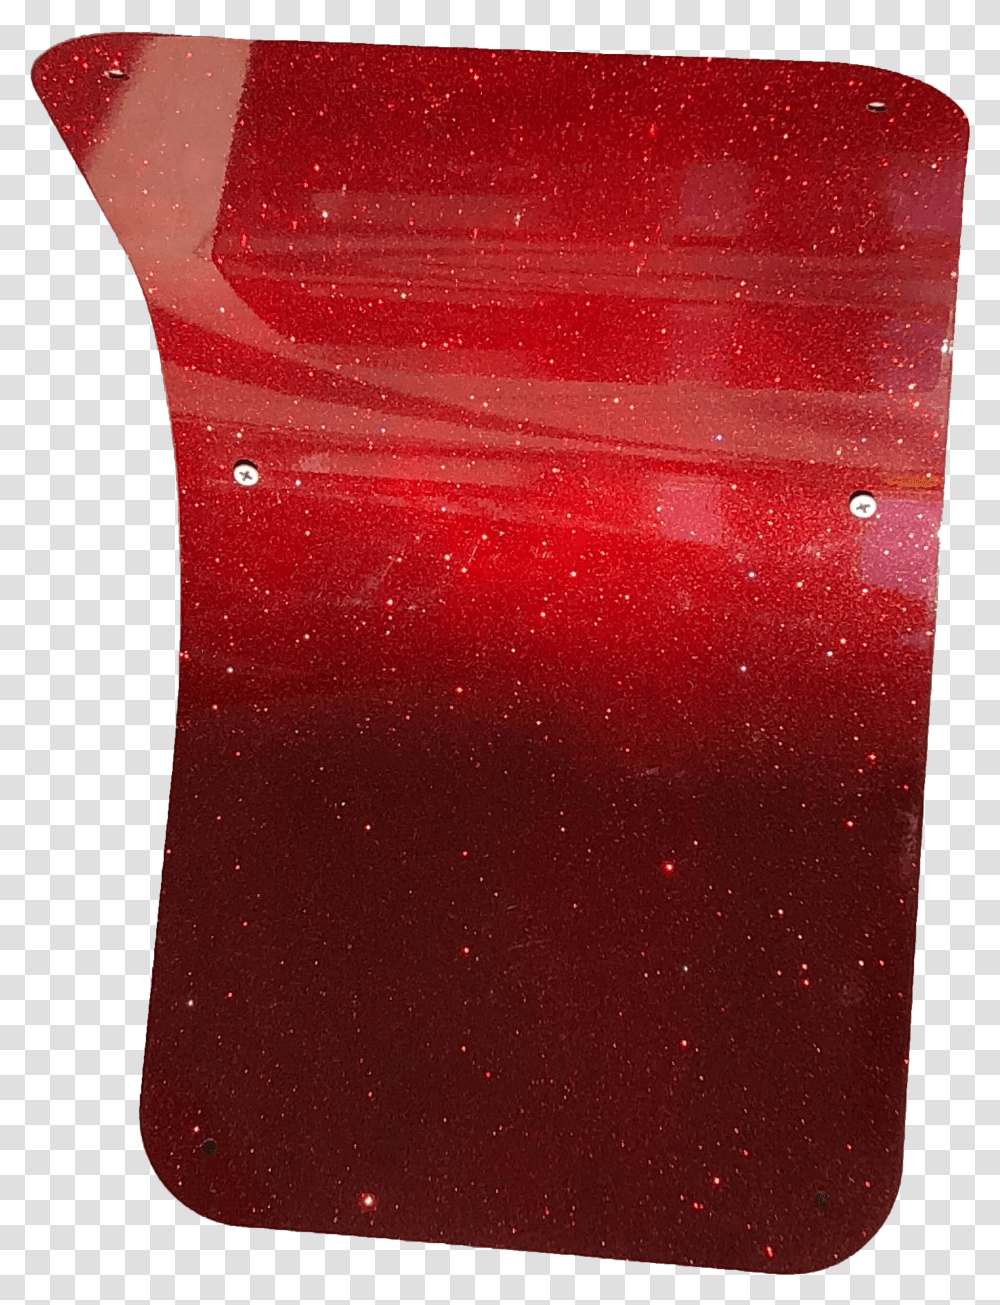 Red Sparkle Puckchesskey Ramp Platter Transparent Png